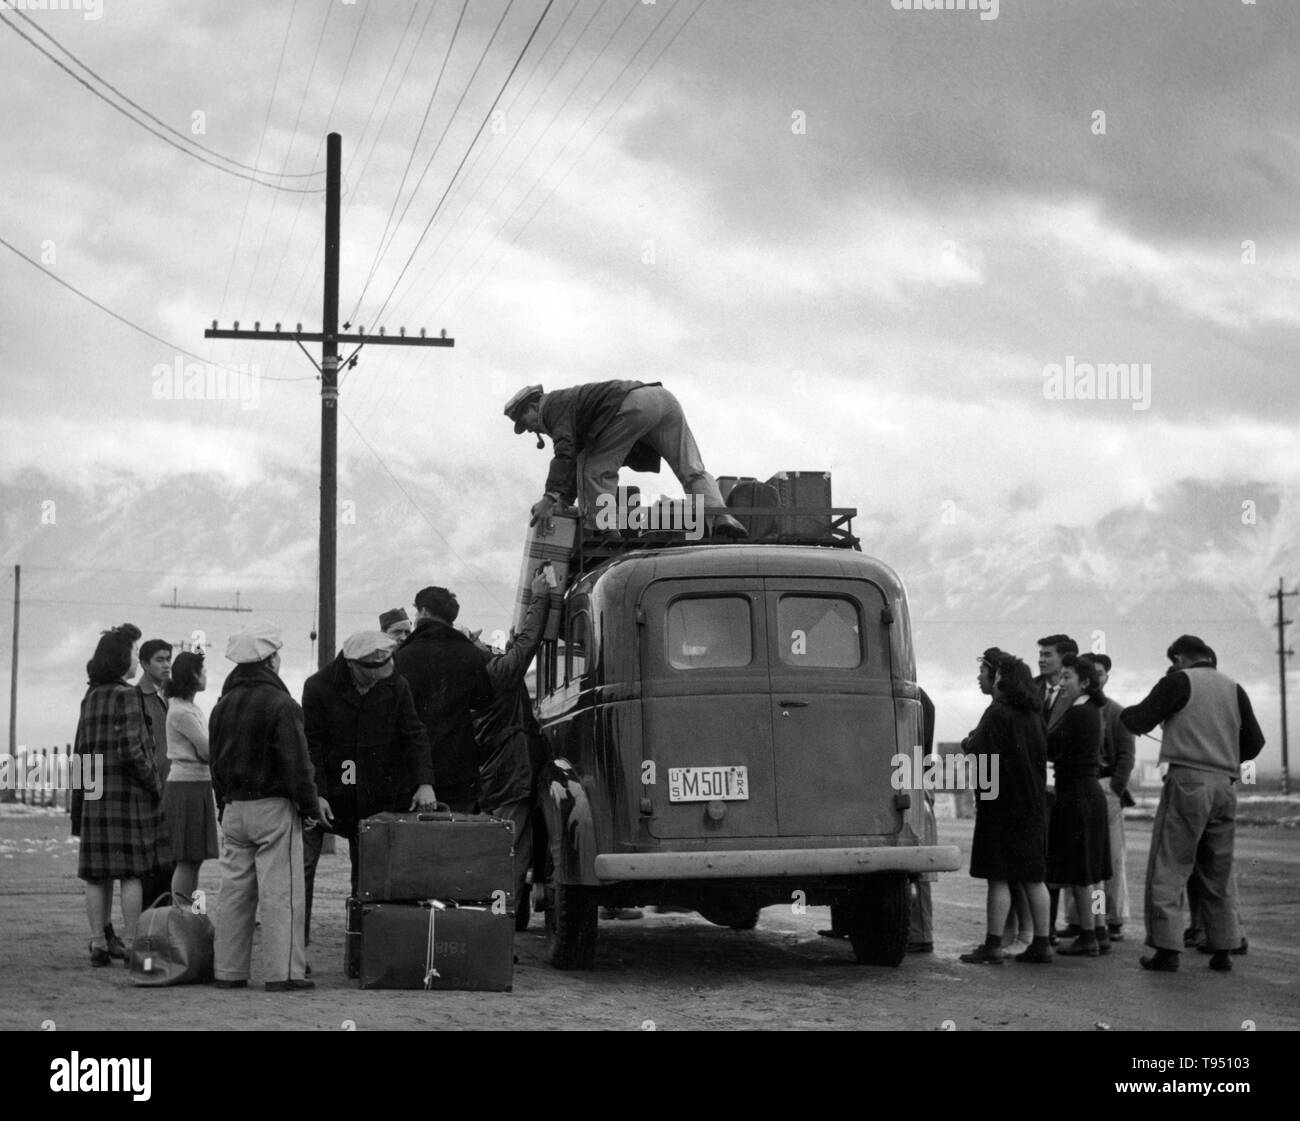 Entitled: 'Loading bus, leaving Manzanar for relocation, Manzanar Relocation Center.' The internment of Japanese-Americans during WWII was the forced relocation and incarceration in camps of 110,000-120,000 people of Japanese ancestry (62% of the internees were US citizens) ordered by President Roosevelt shortly after Japan's attack on Pearl Harbor. Japanese-Americans were incarcerated based on local population concentrations and regional politics. Stock Photo